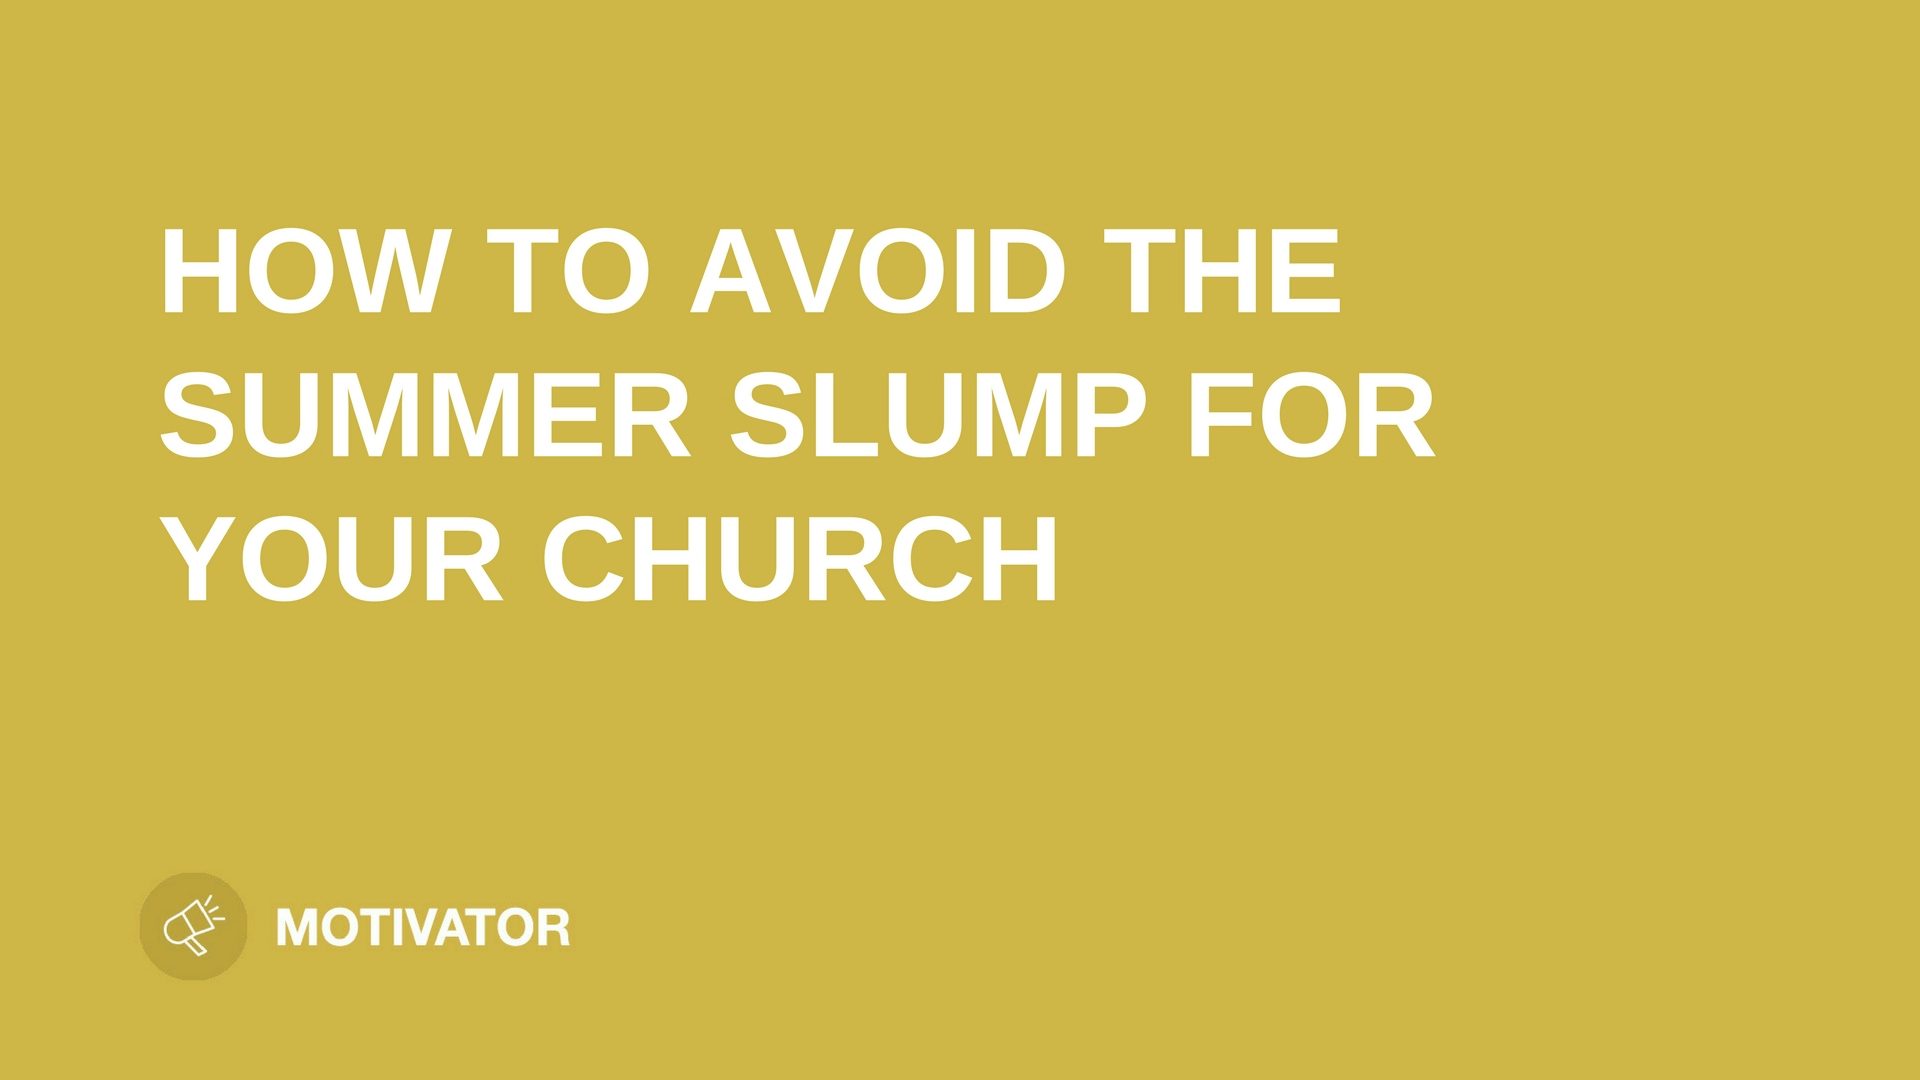 text "AVOID SUMMER SLUMP FOR YOUR CHURCH" on yellow background leaders.church